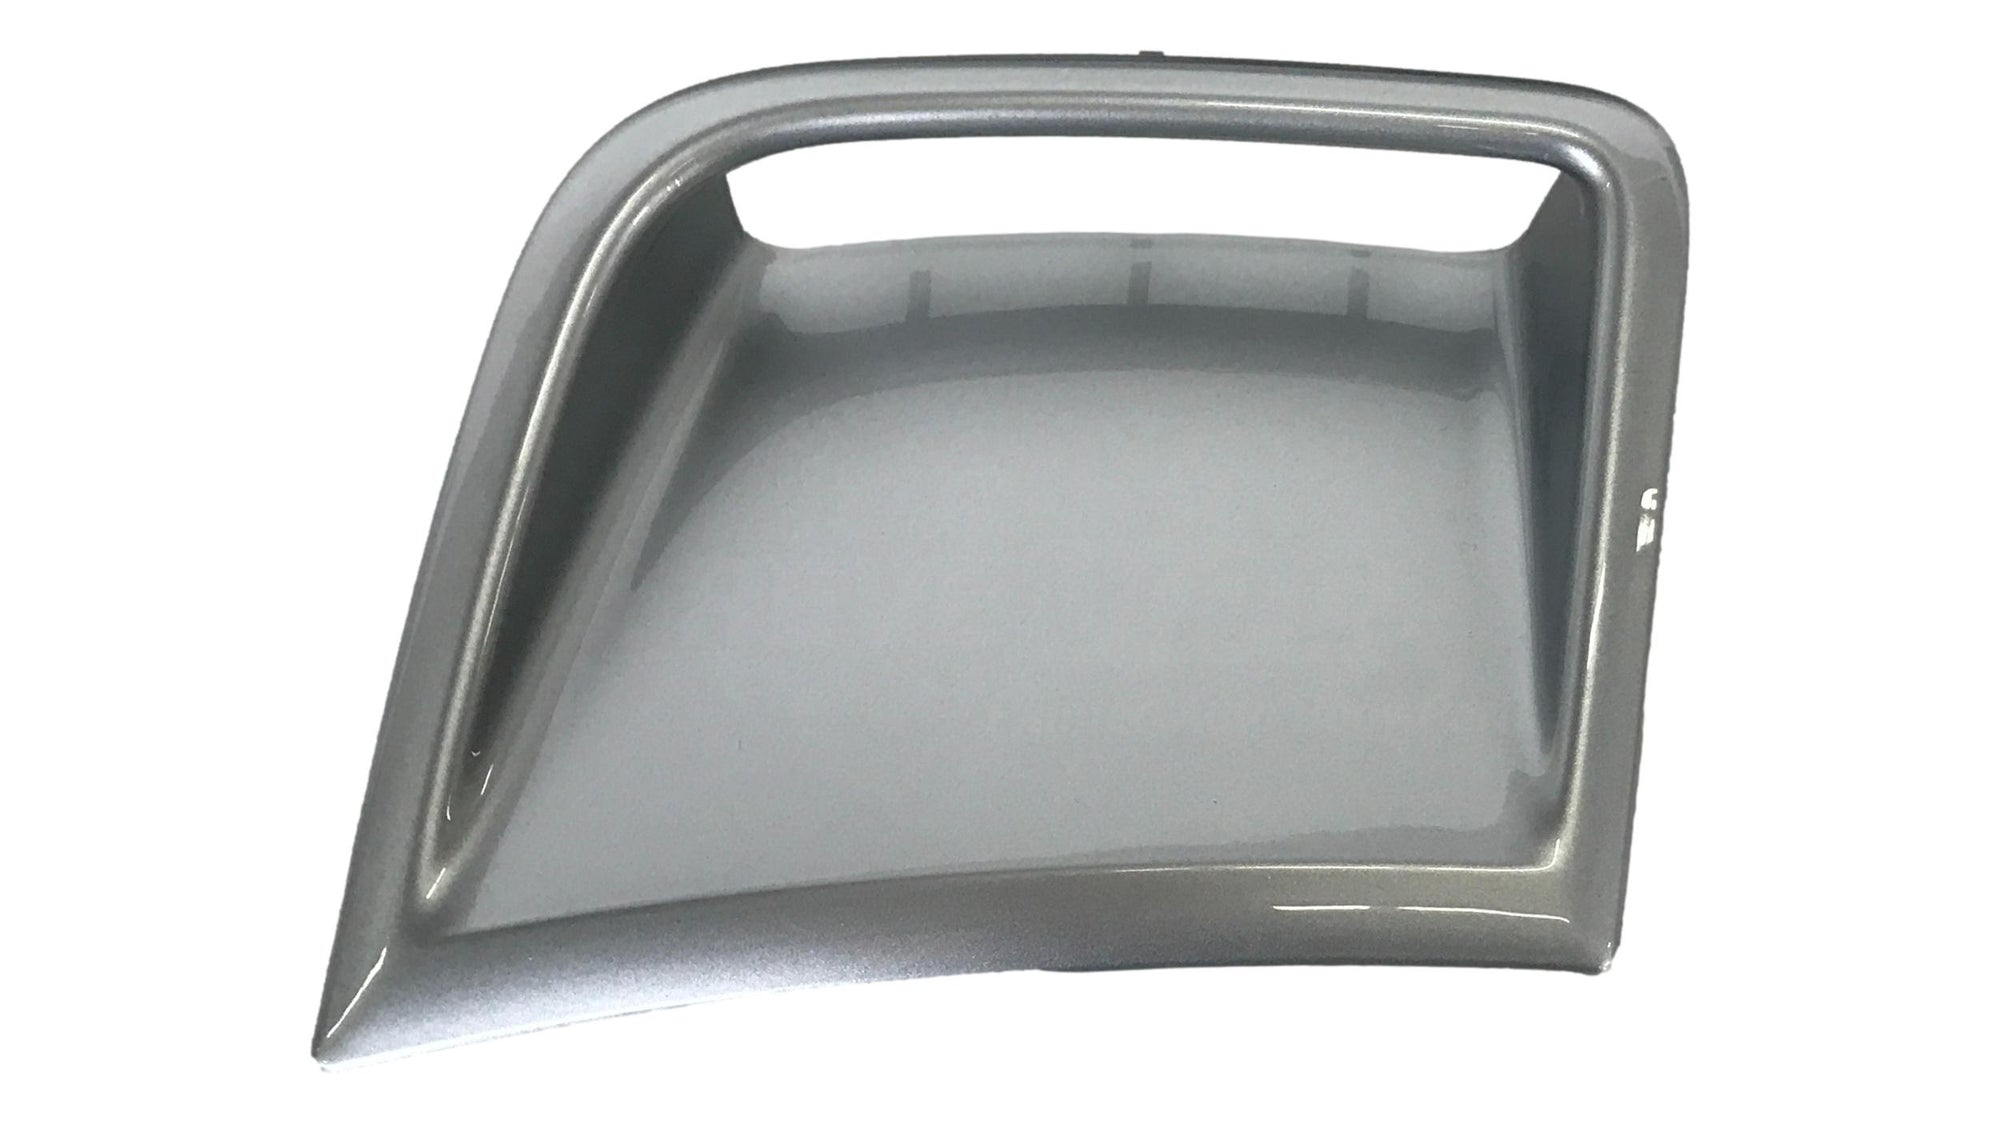 19657 -  2008-2014 Subaru Impreza Bumper Side Vent Painted (WITH_ 3 Vent Clips Included) Ice Silver Metallic (E1U, G1U, GE2) _ 2011-2014 _ Right, Passenger-Side _ (OEM Only) WITH_ 3 Vent Clips Included 57739FG010 57721FG000 clipped_rev_1